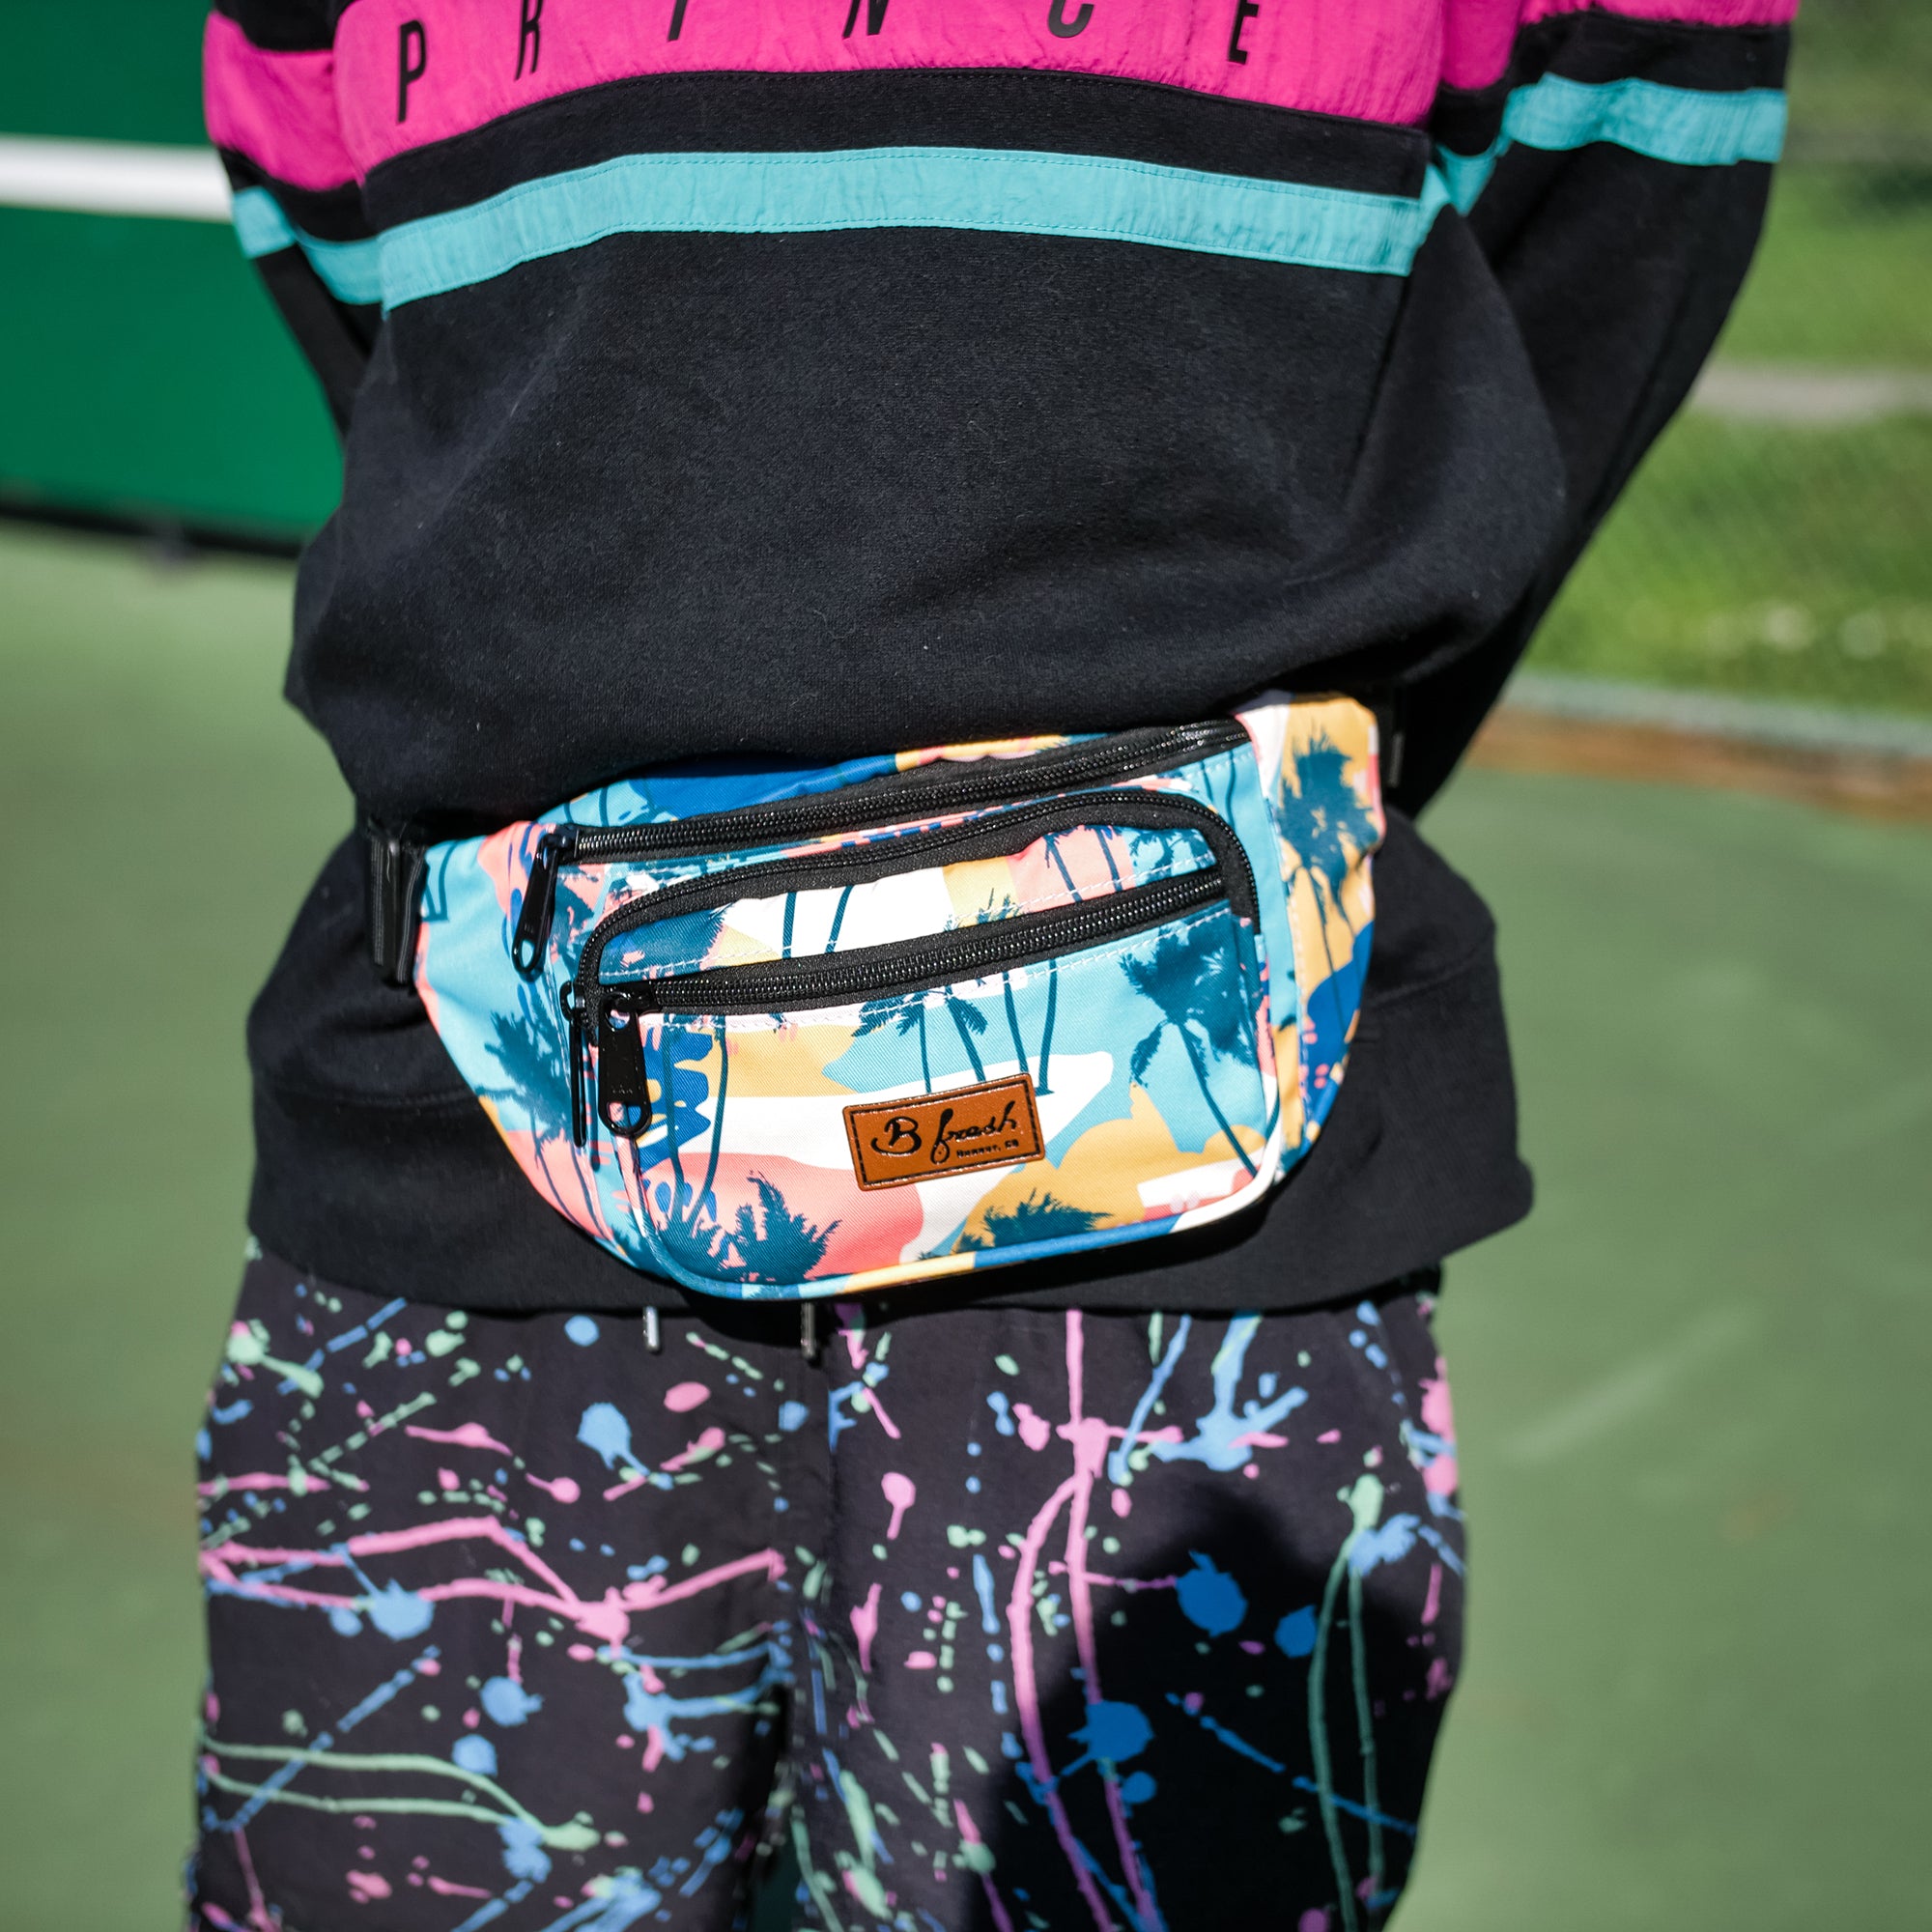 Beach Bum Fanny Pack - 80s inspired retro beach miami style fanny pack with blue yellow pink palm trees and beaches.  B Fresh Gear